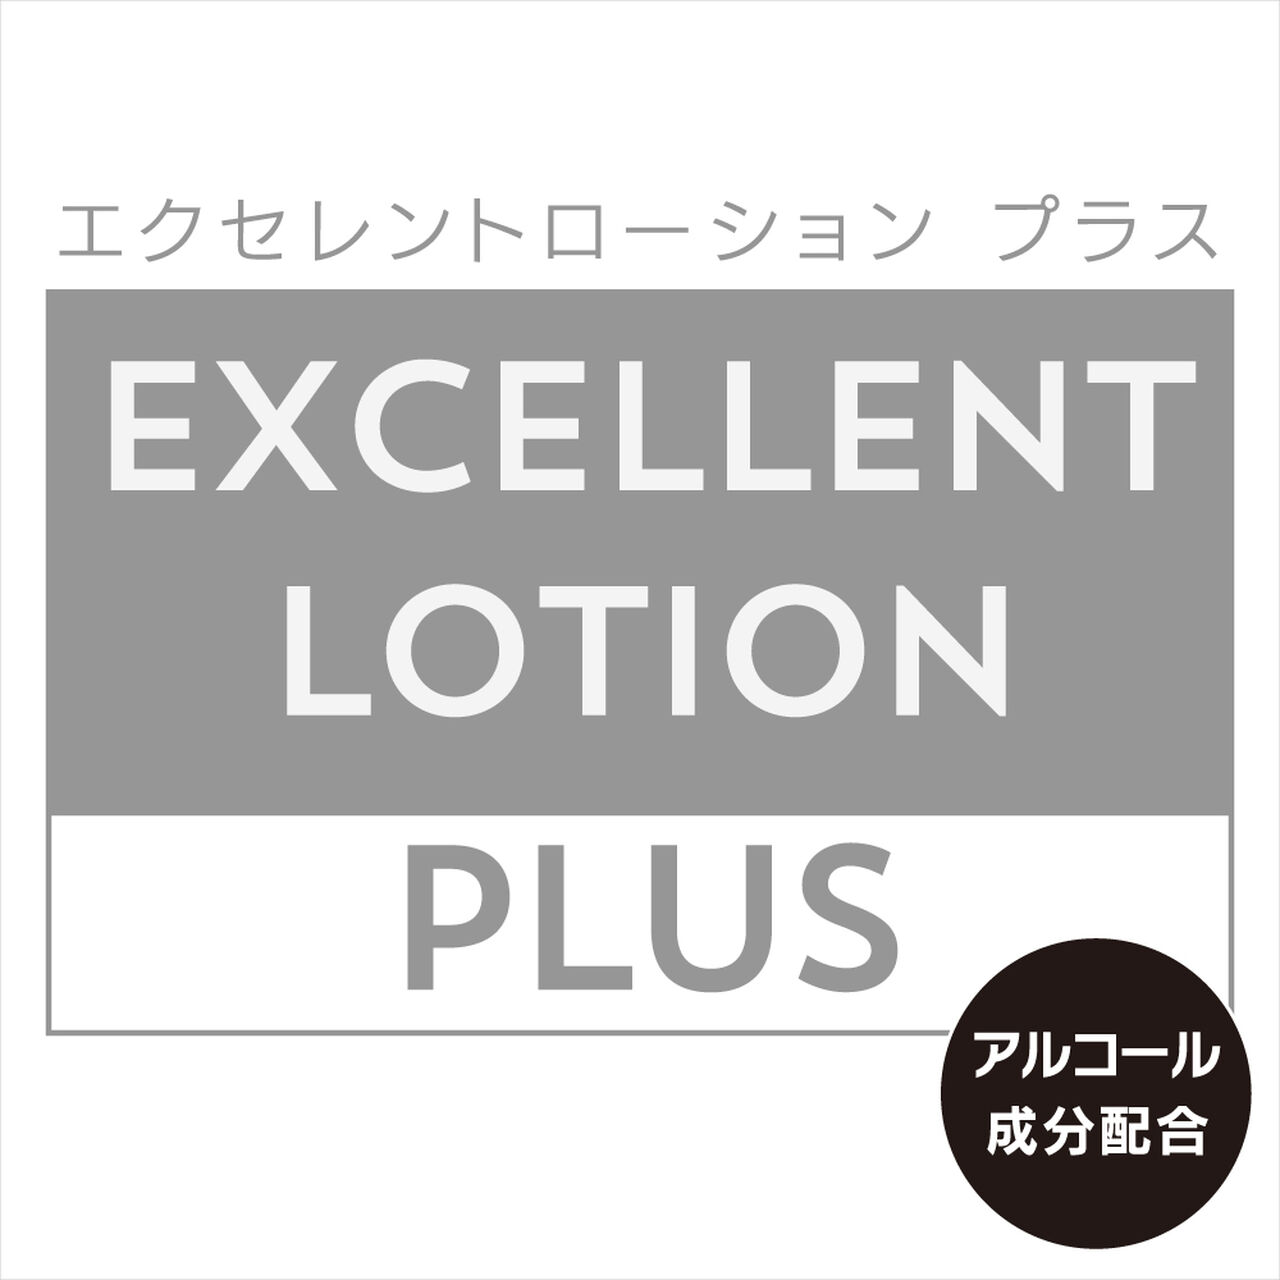 EXCELLENT LOTION PLUS FUWAFUWA ALCOHOL TYPE 150ml,, large image number 6